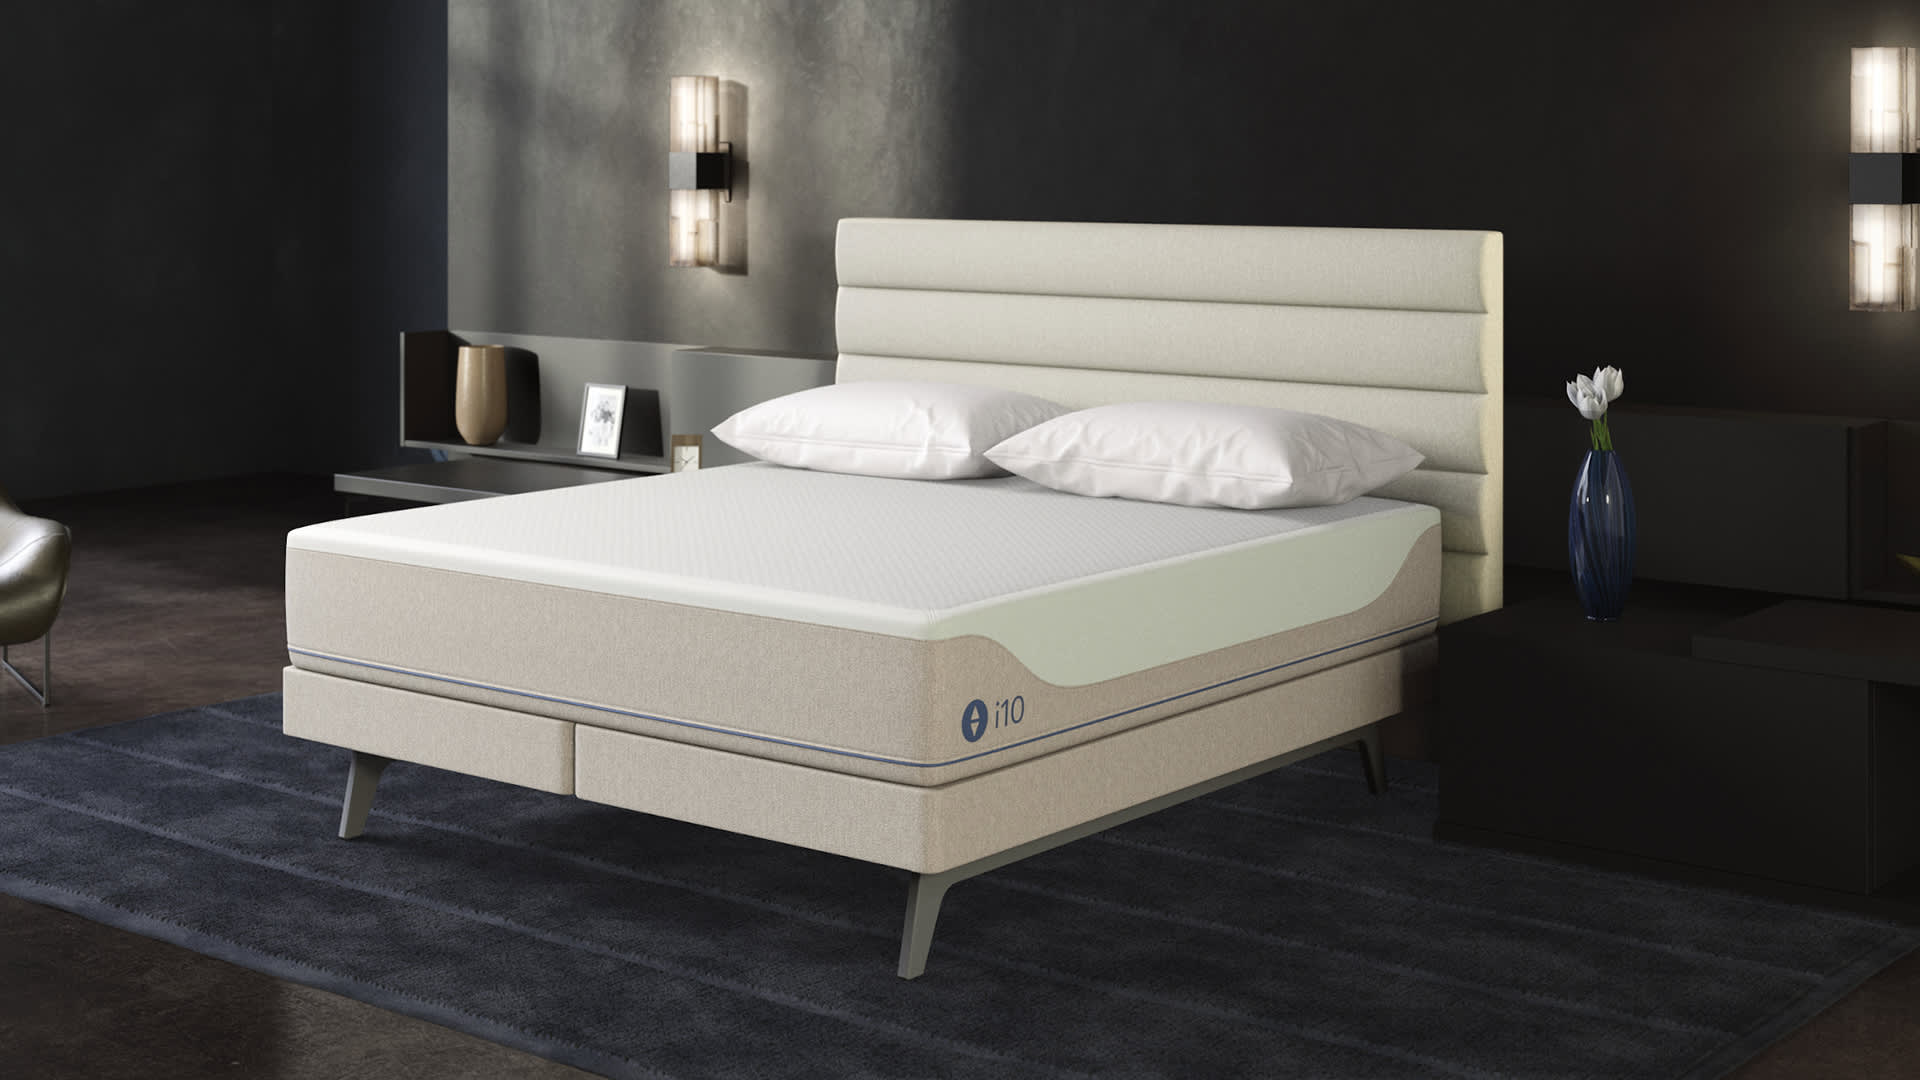 Sleep Number C4 Review Good Fit For, How To Move Sleep Number C4 Bed